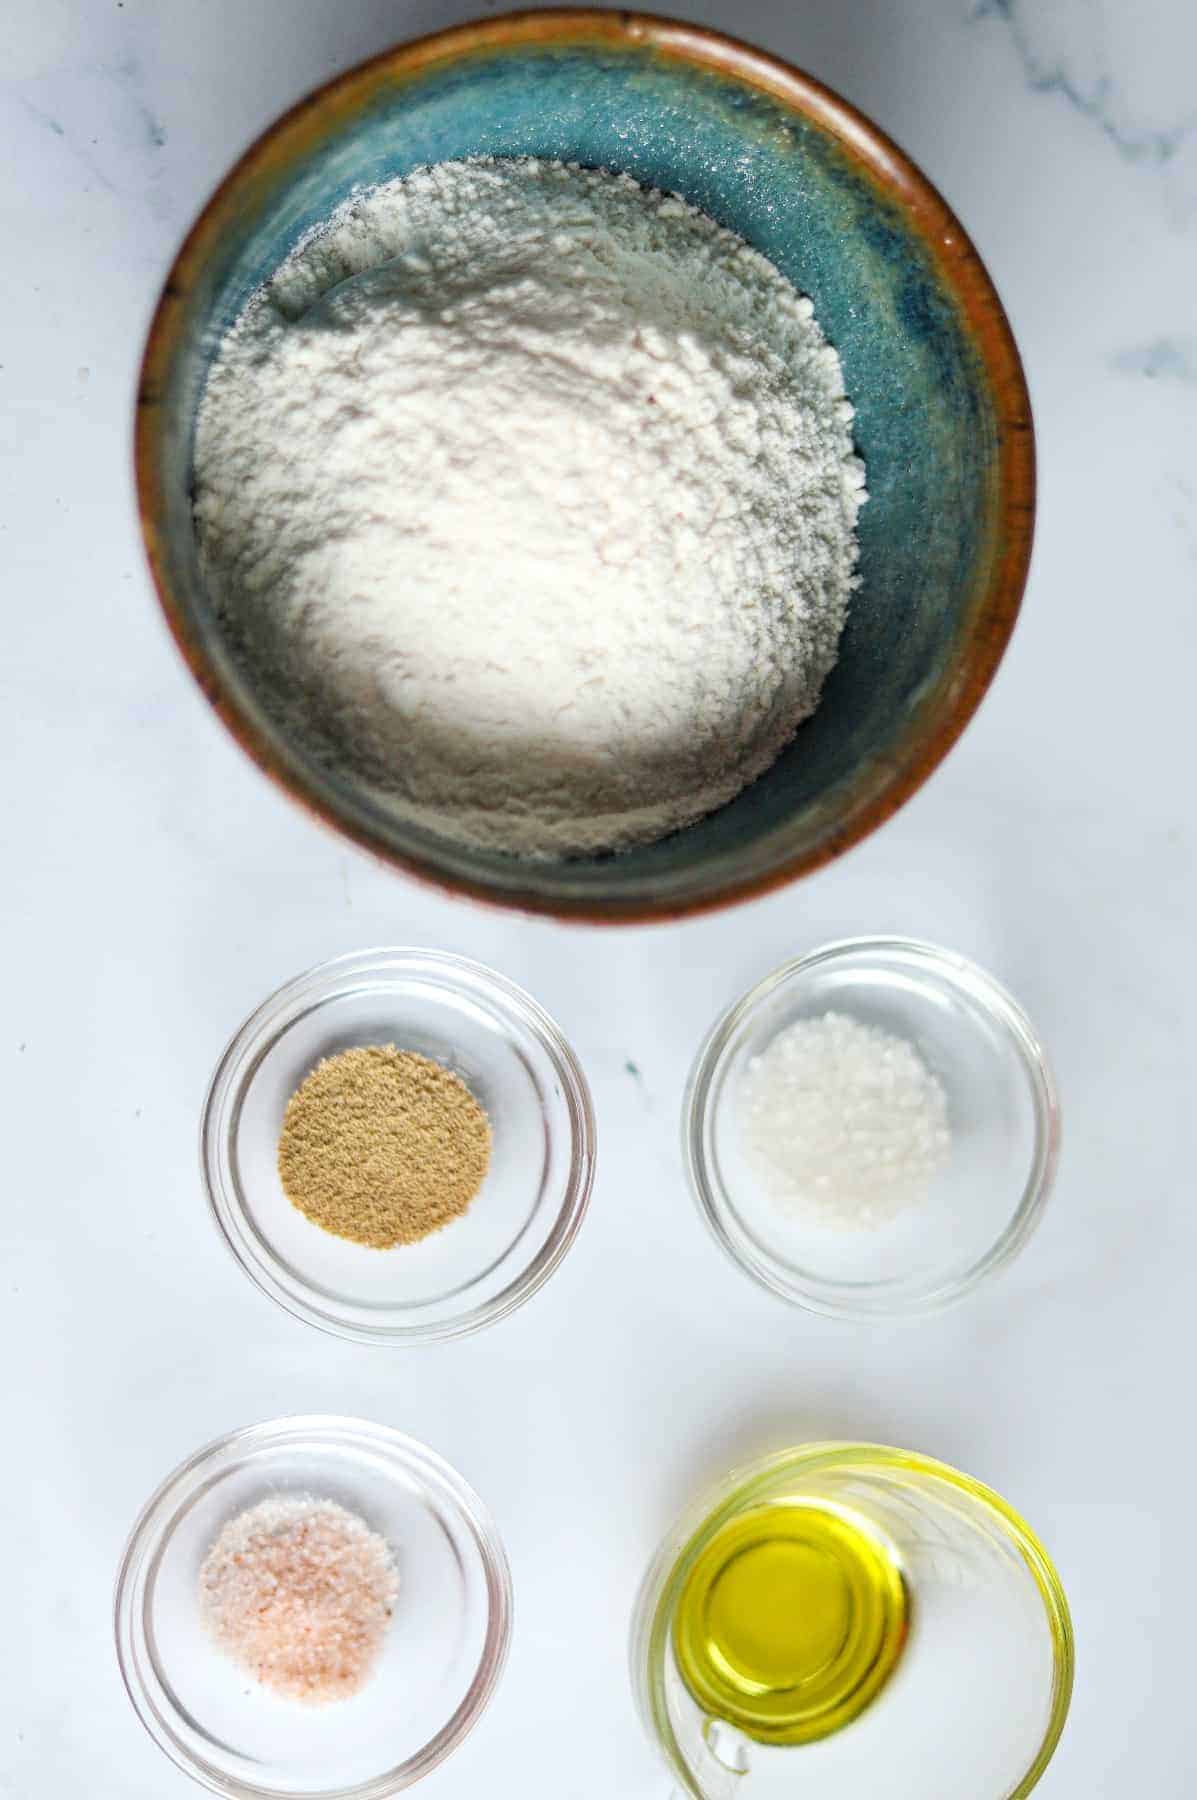 Small bowls holding the ingredients to make pita bread.